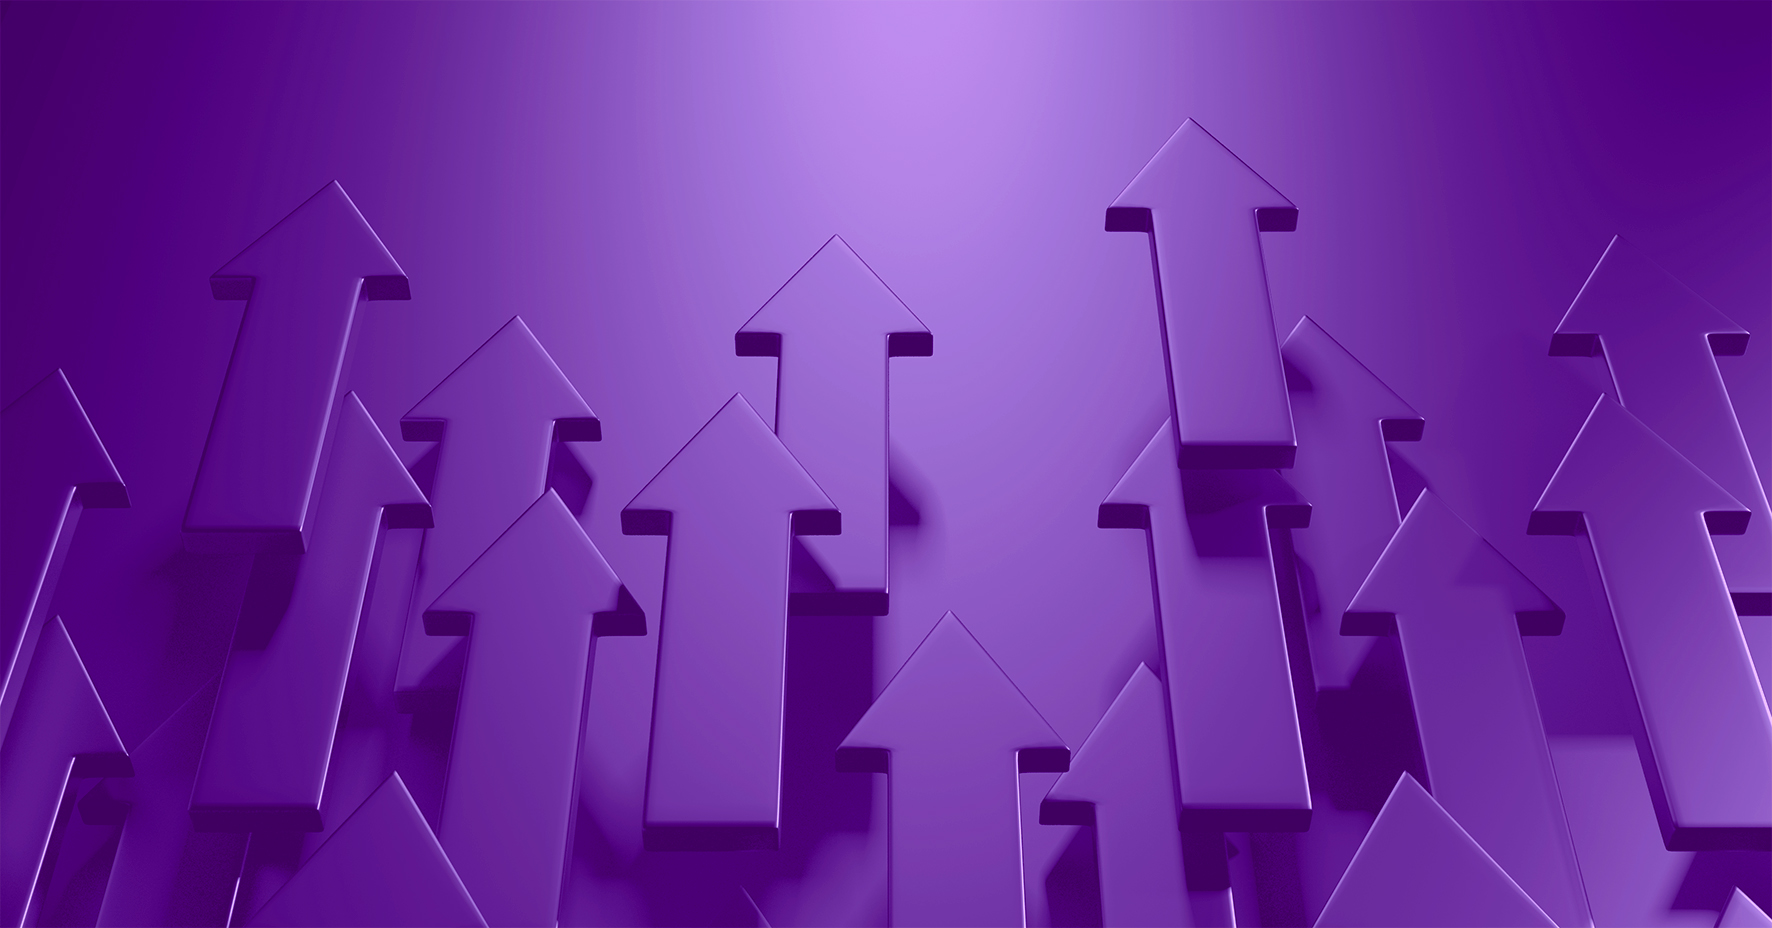 Many purple arrows going up, on purple background